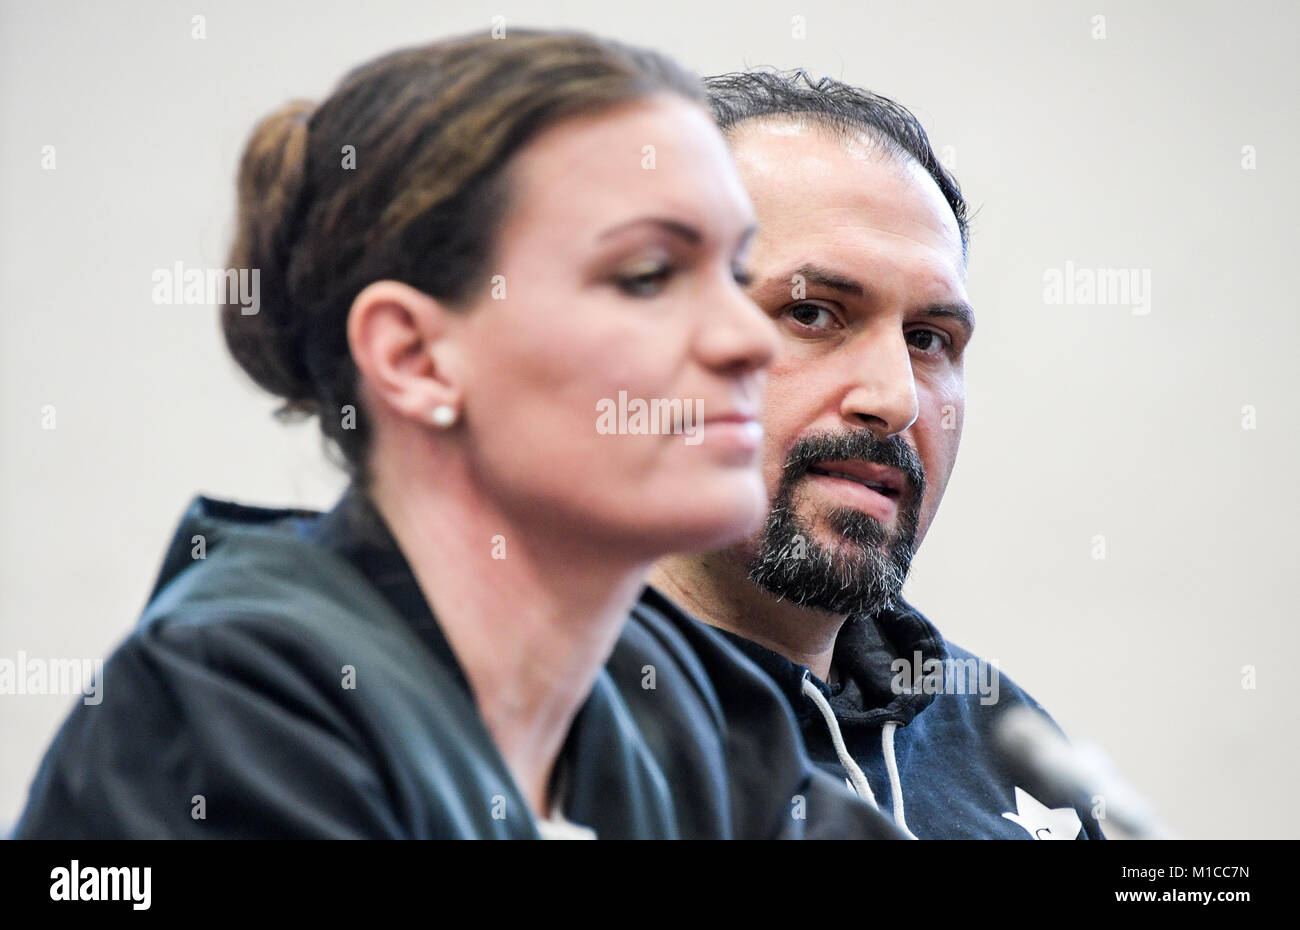 Hamburg, Germany. 29th Jan, 2018. A 30-year-old defendant and his lawyer Svenja Gruhnwald await his verdict at a court in Hamburg, Germany, 29 January 2018. He is guilty of scamming several elderly persons by pretending to be their grandchild. Credit: Axel Heimken/dpa/Alamy Live News Stock Photo